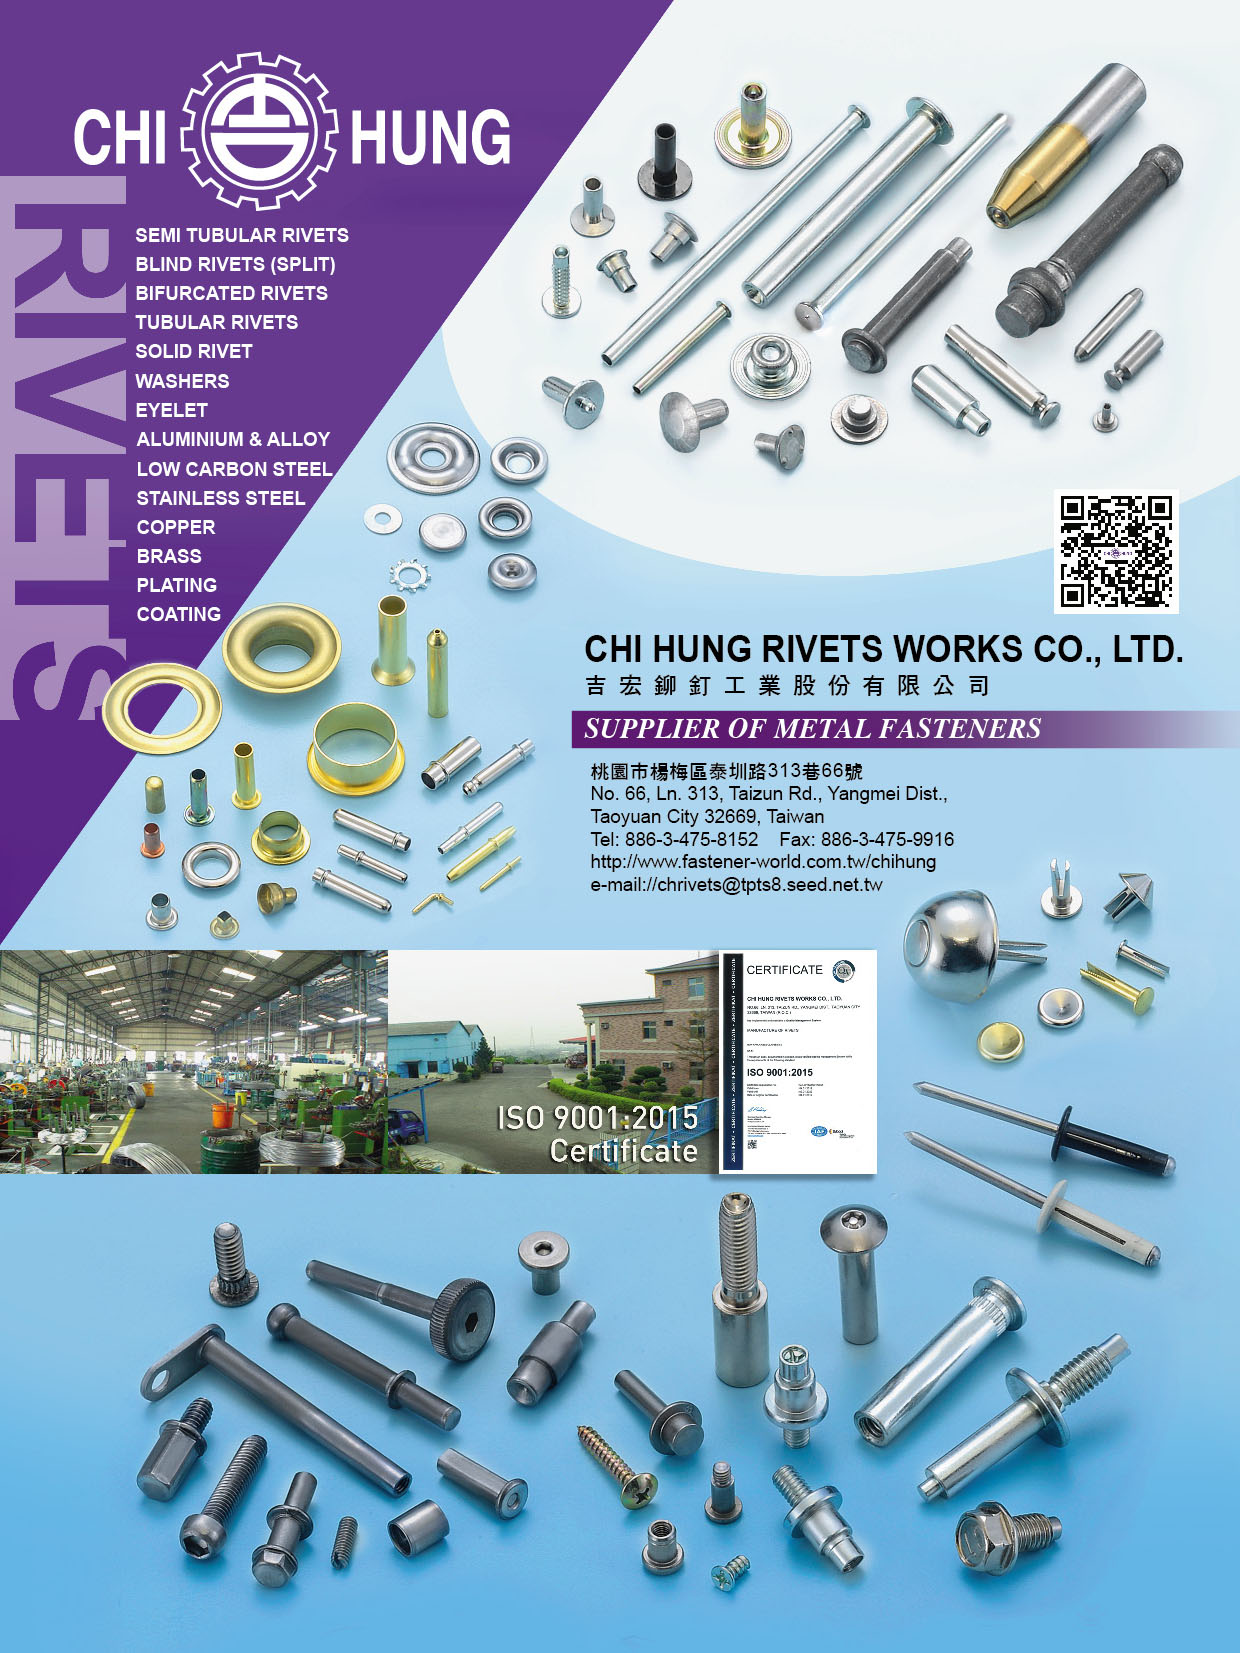 CHI HUNG RIVETS WORKS CO., LTD. _Online Catalogues